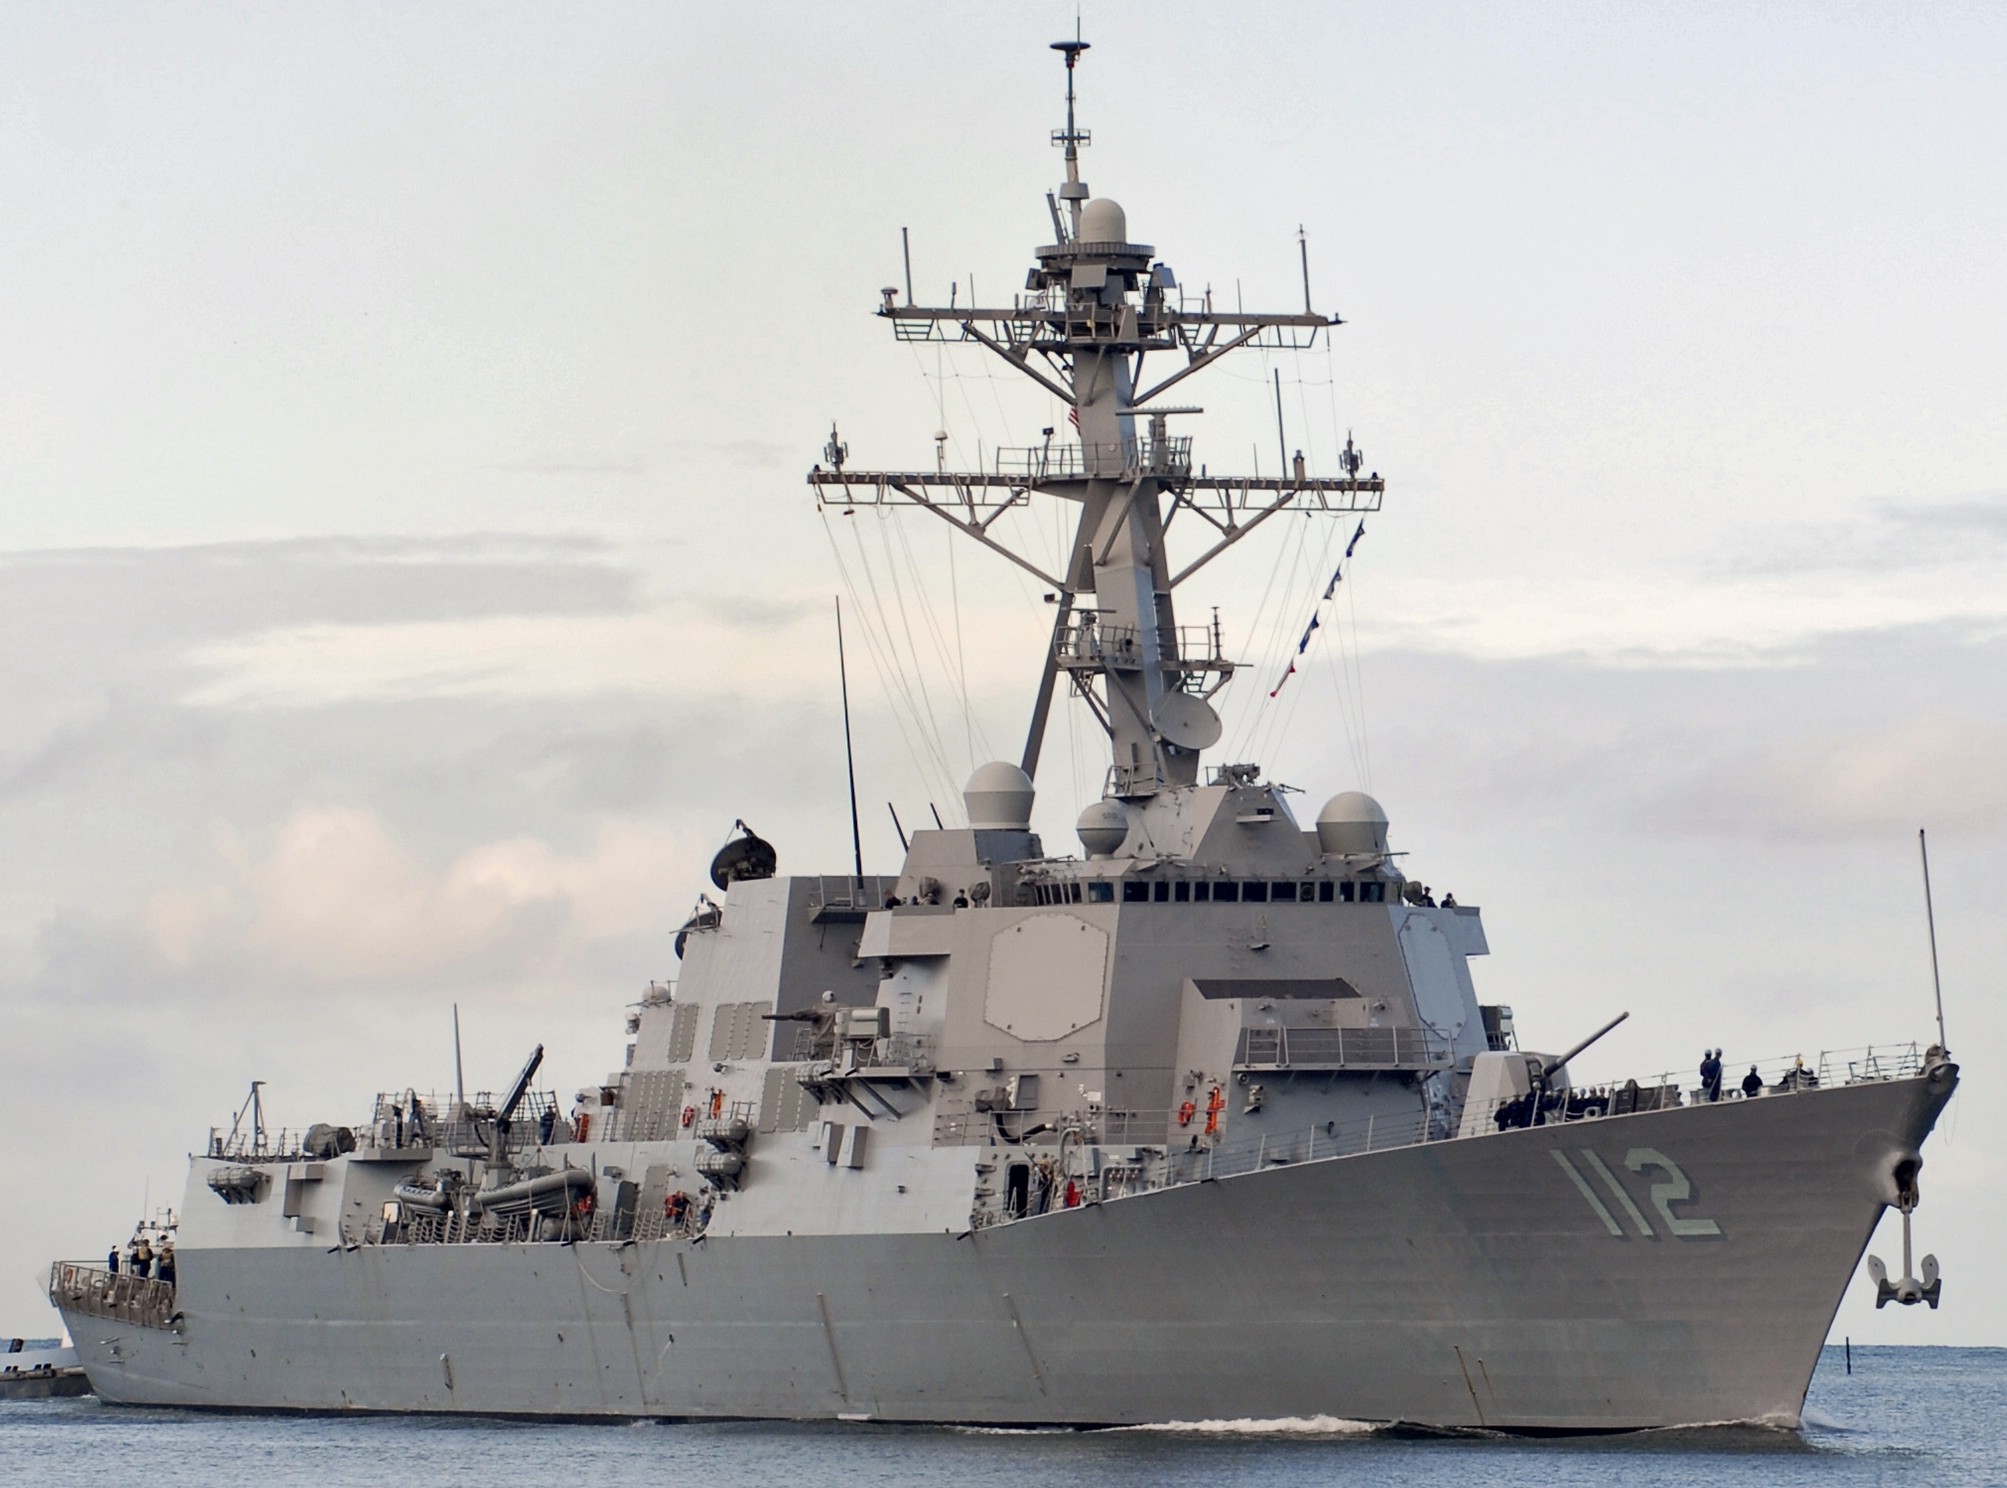 ddg-112 uss michael murphy arleigh burke class guided missile destroyer aegis us navy 11